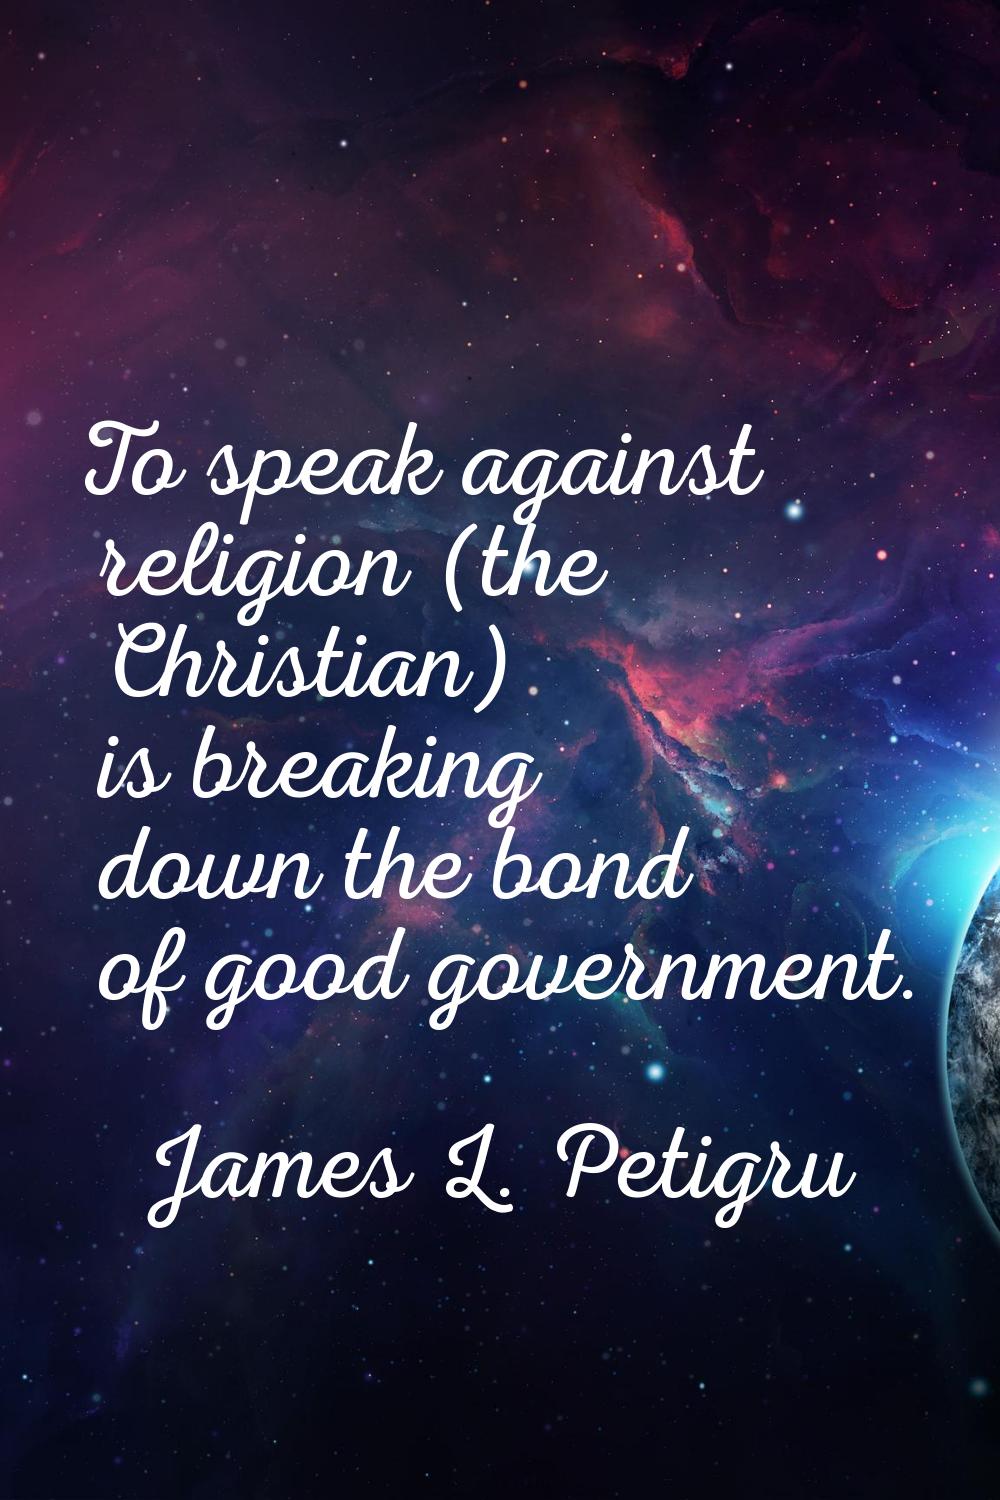 To speak against religion (the Christian) is breaking down the bond of good government.